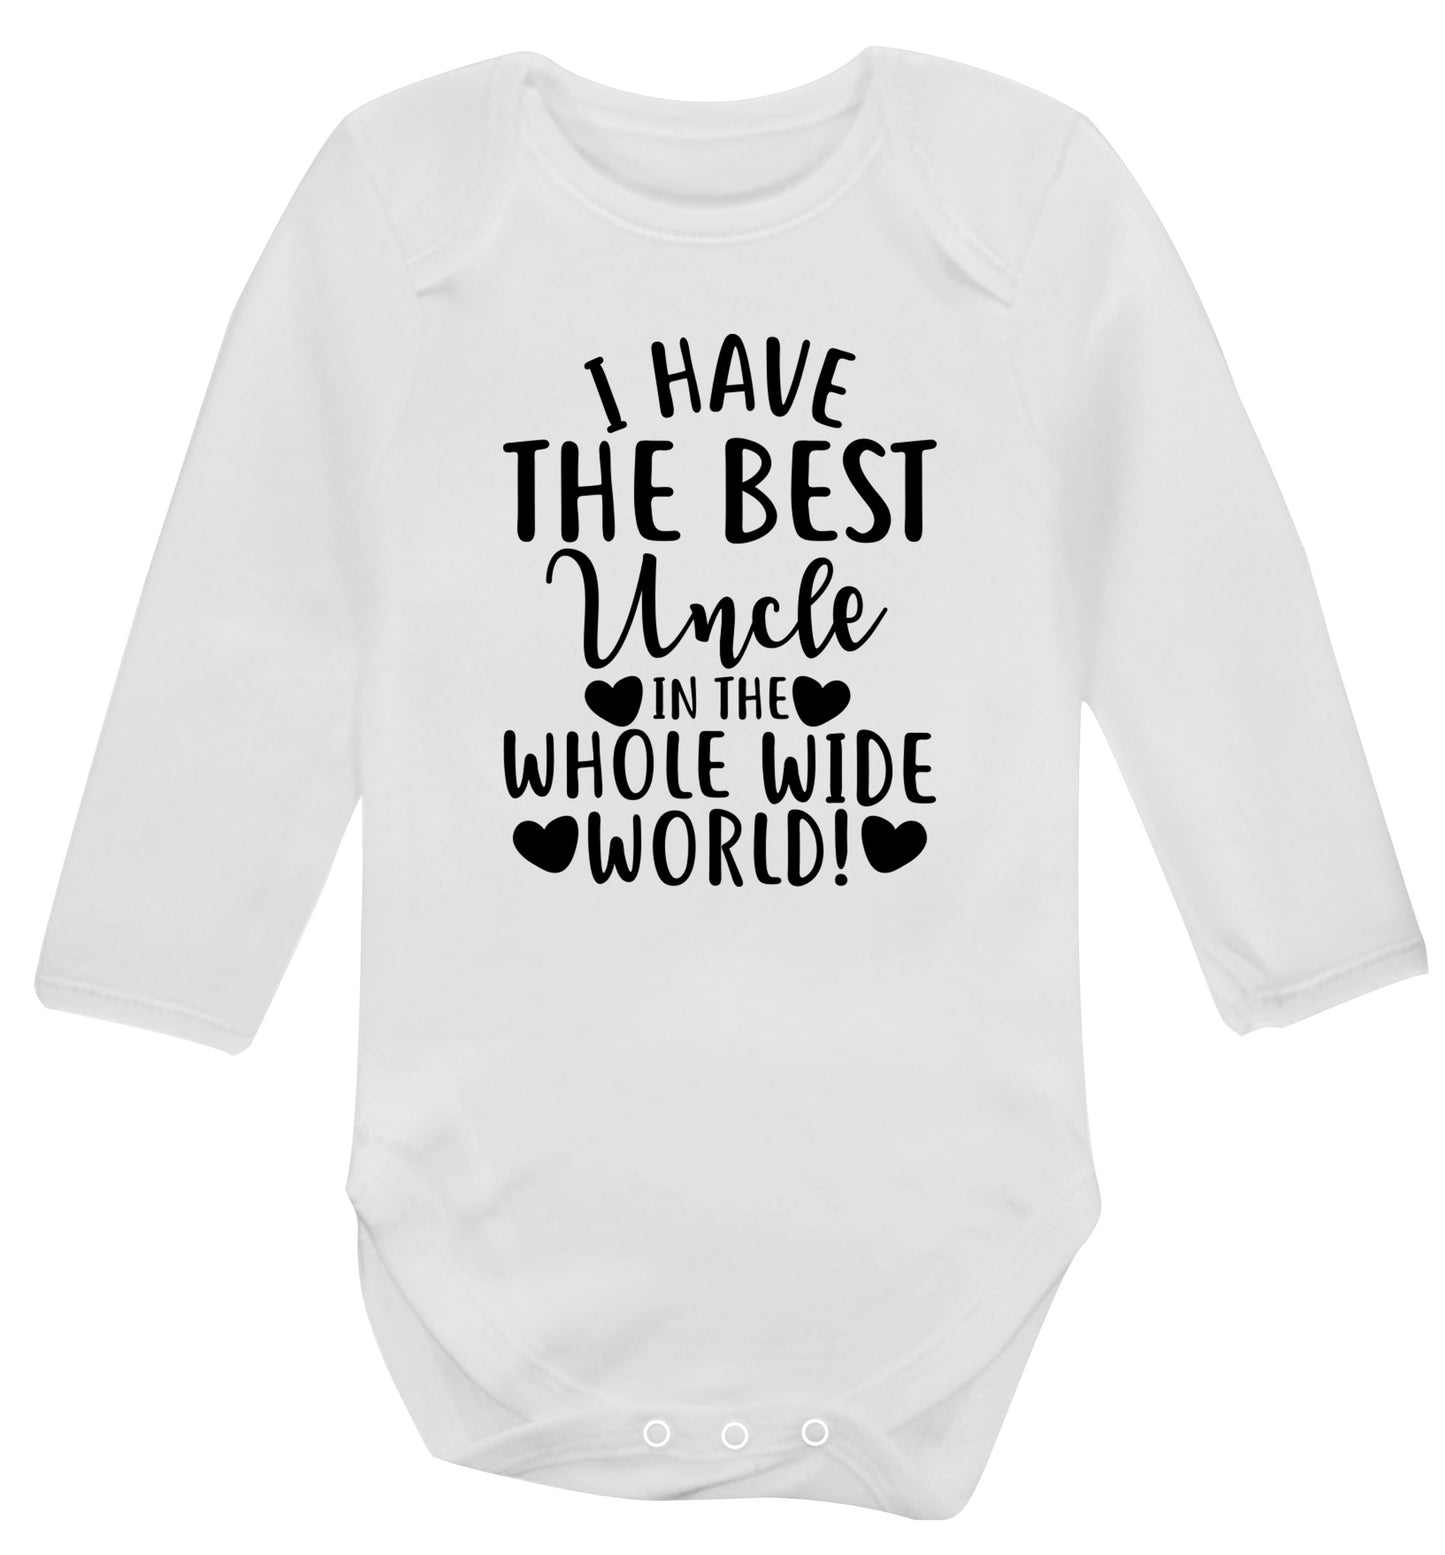 I have the best uncle in the whole wide world! Baby Vest long sleeved white 6-12 months